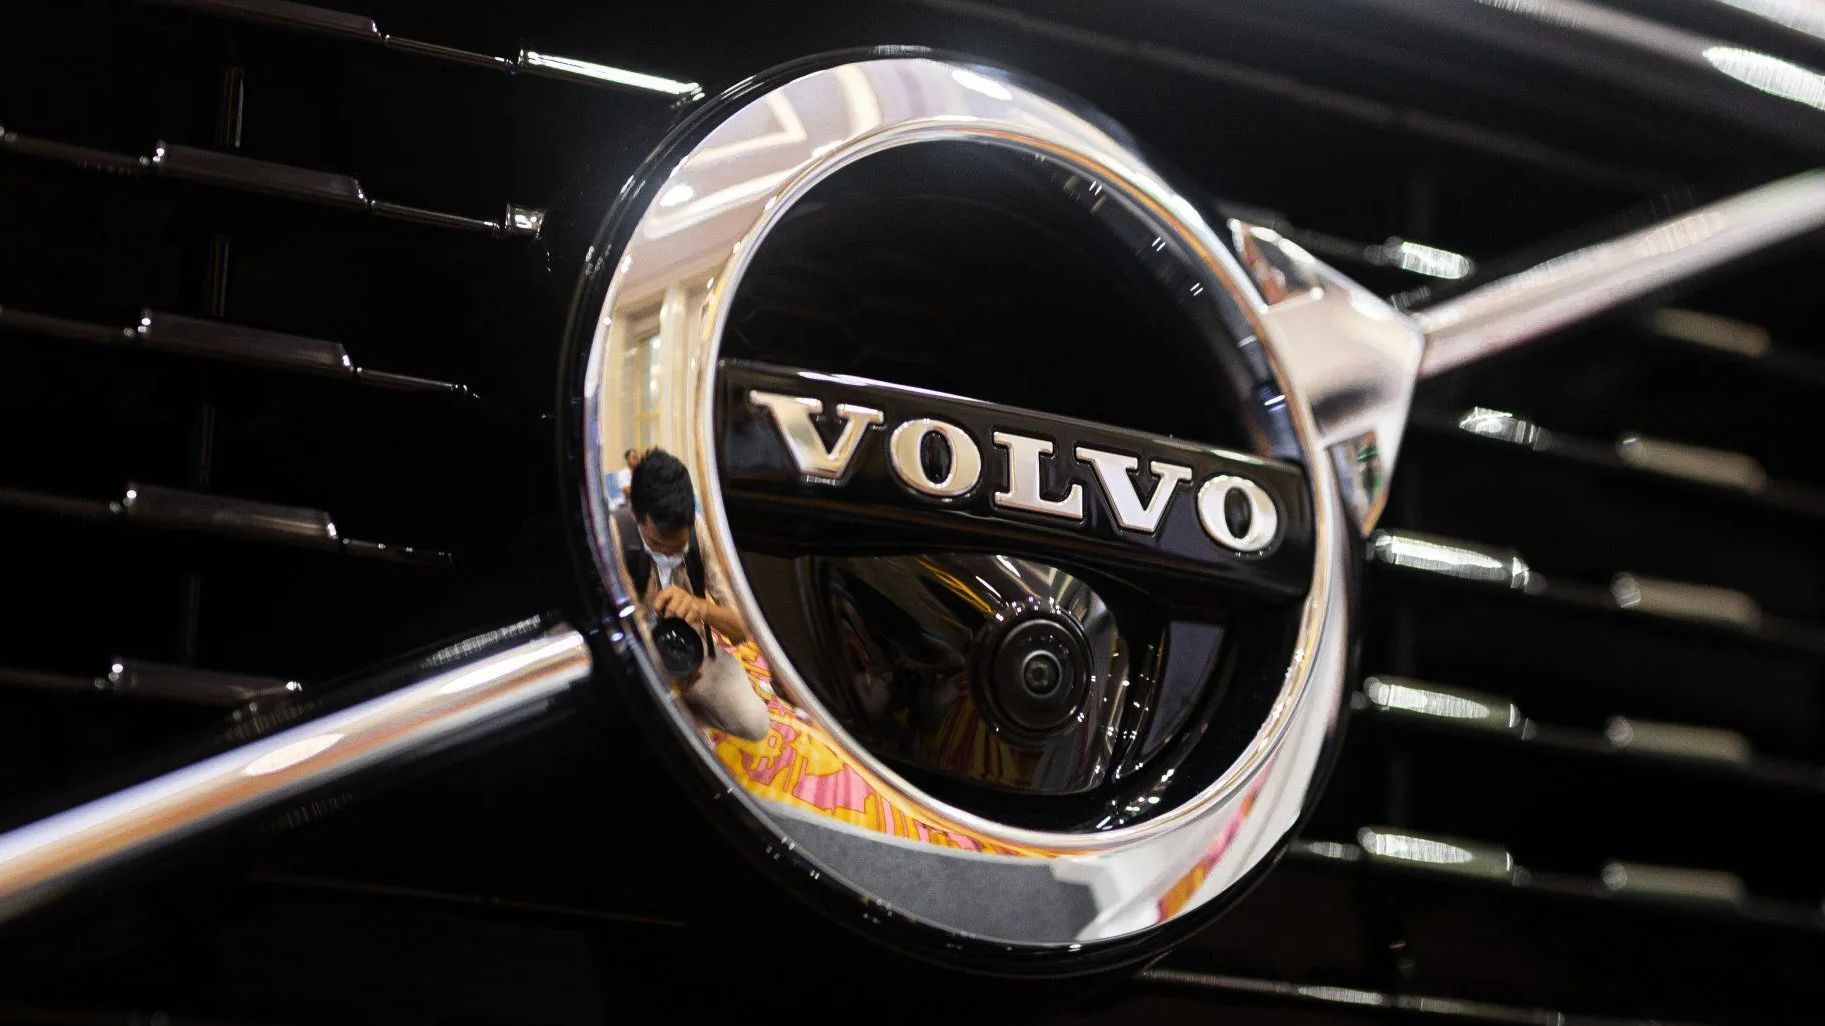 Volvo Service and Repairs at ﻿Guy's Automotive﻿ in ﻿North Tampa and Tampa, FL﻿